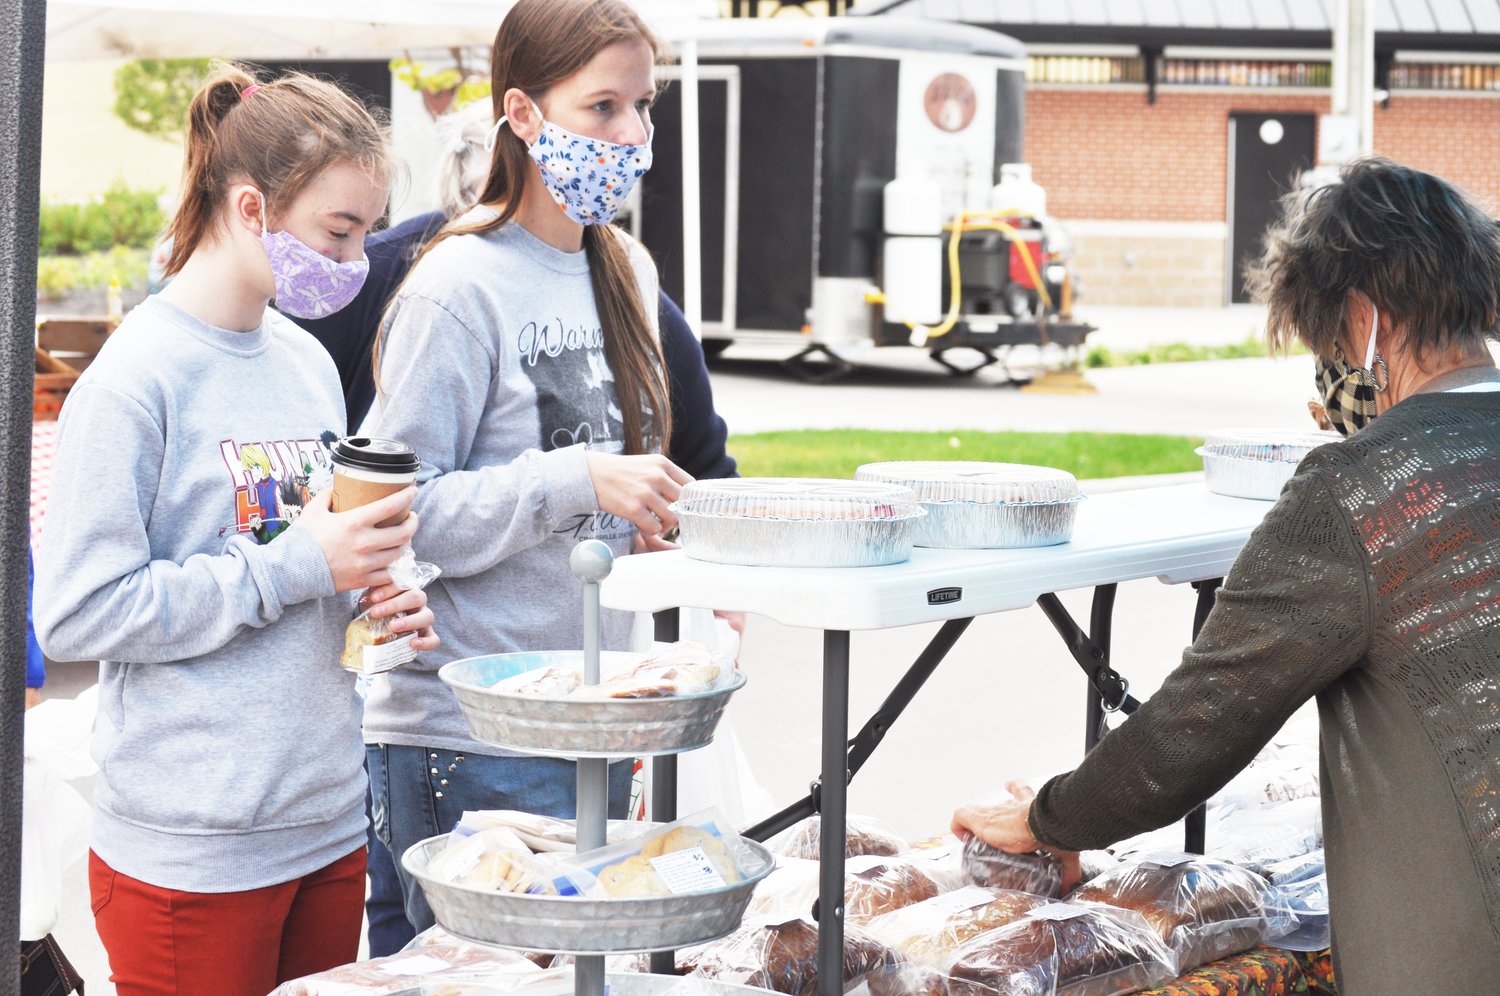 Lacey Wallace, right, and her daughter Ally Wallace purchase baked goods from Sharon Young of Thyme for All Seasons at the Crawfordsville Farmers' Market Saturday. The market was celebrating the harvest season.